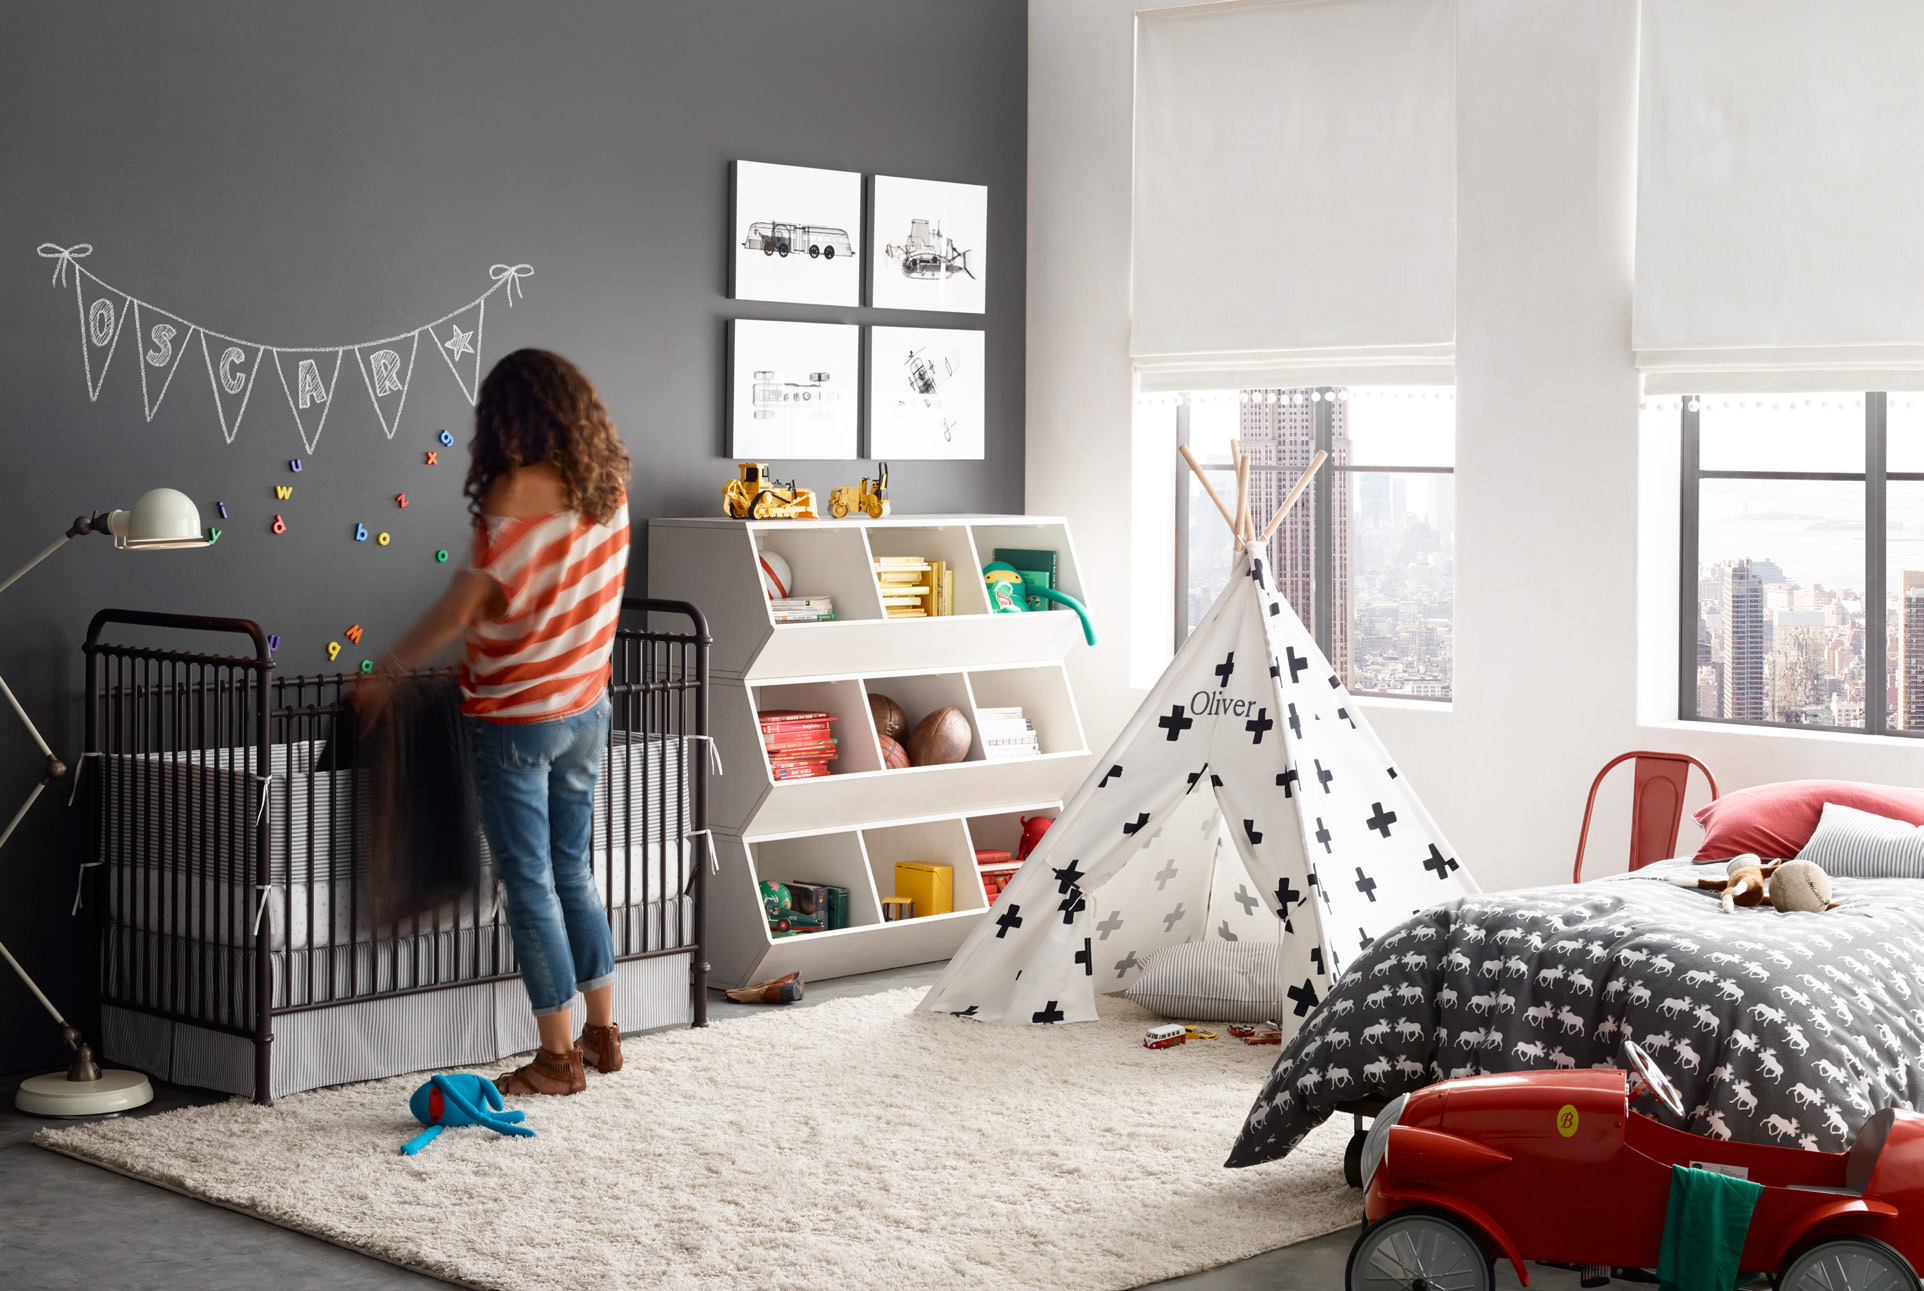 Interior-design-tips-ideas-to-decorate-your-childs-bedroom-_1